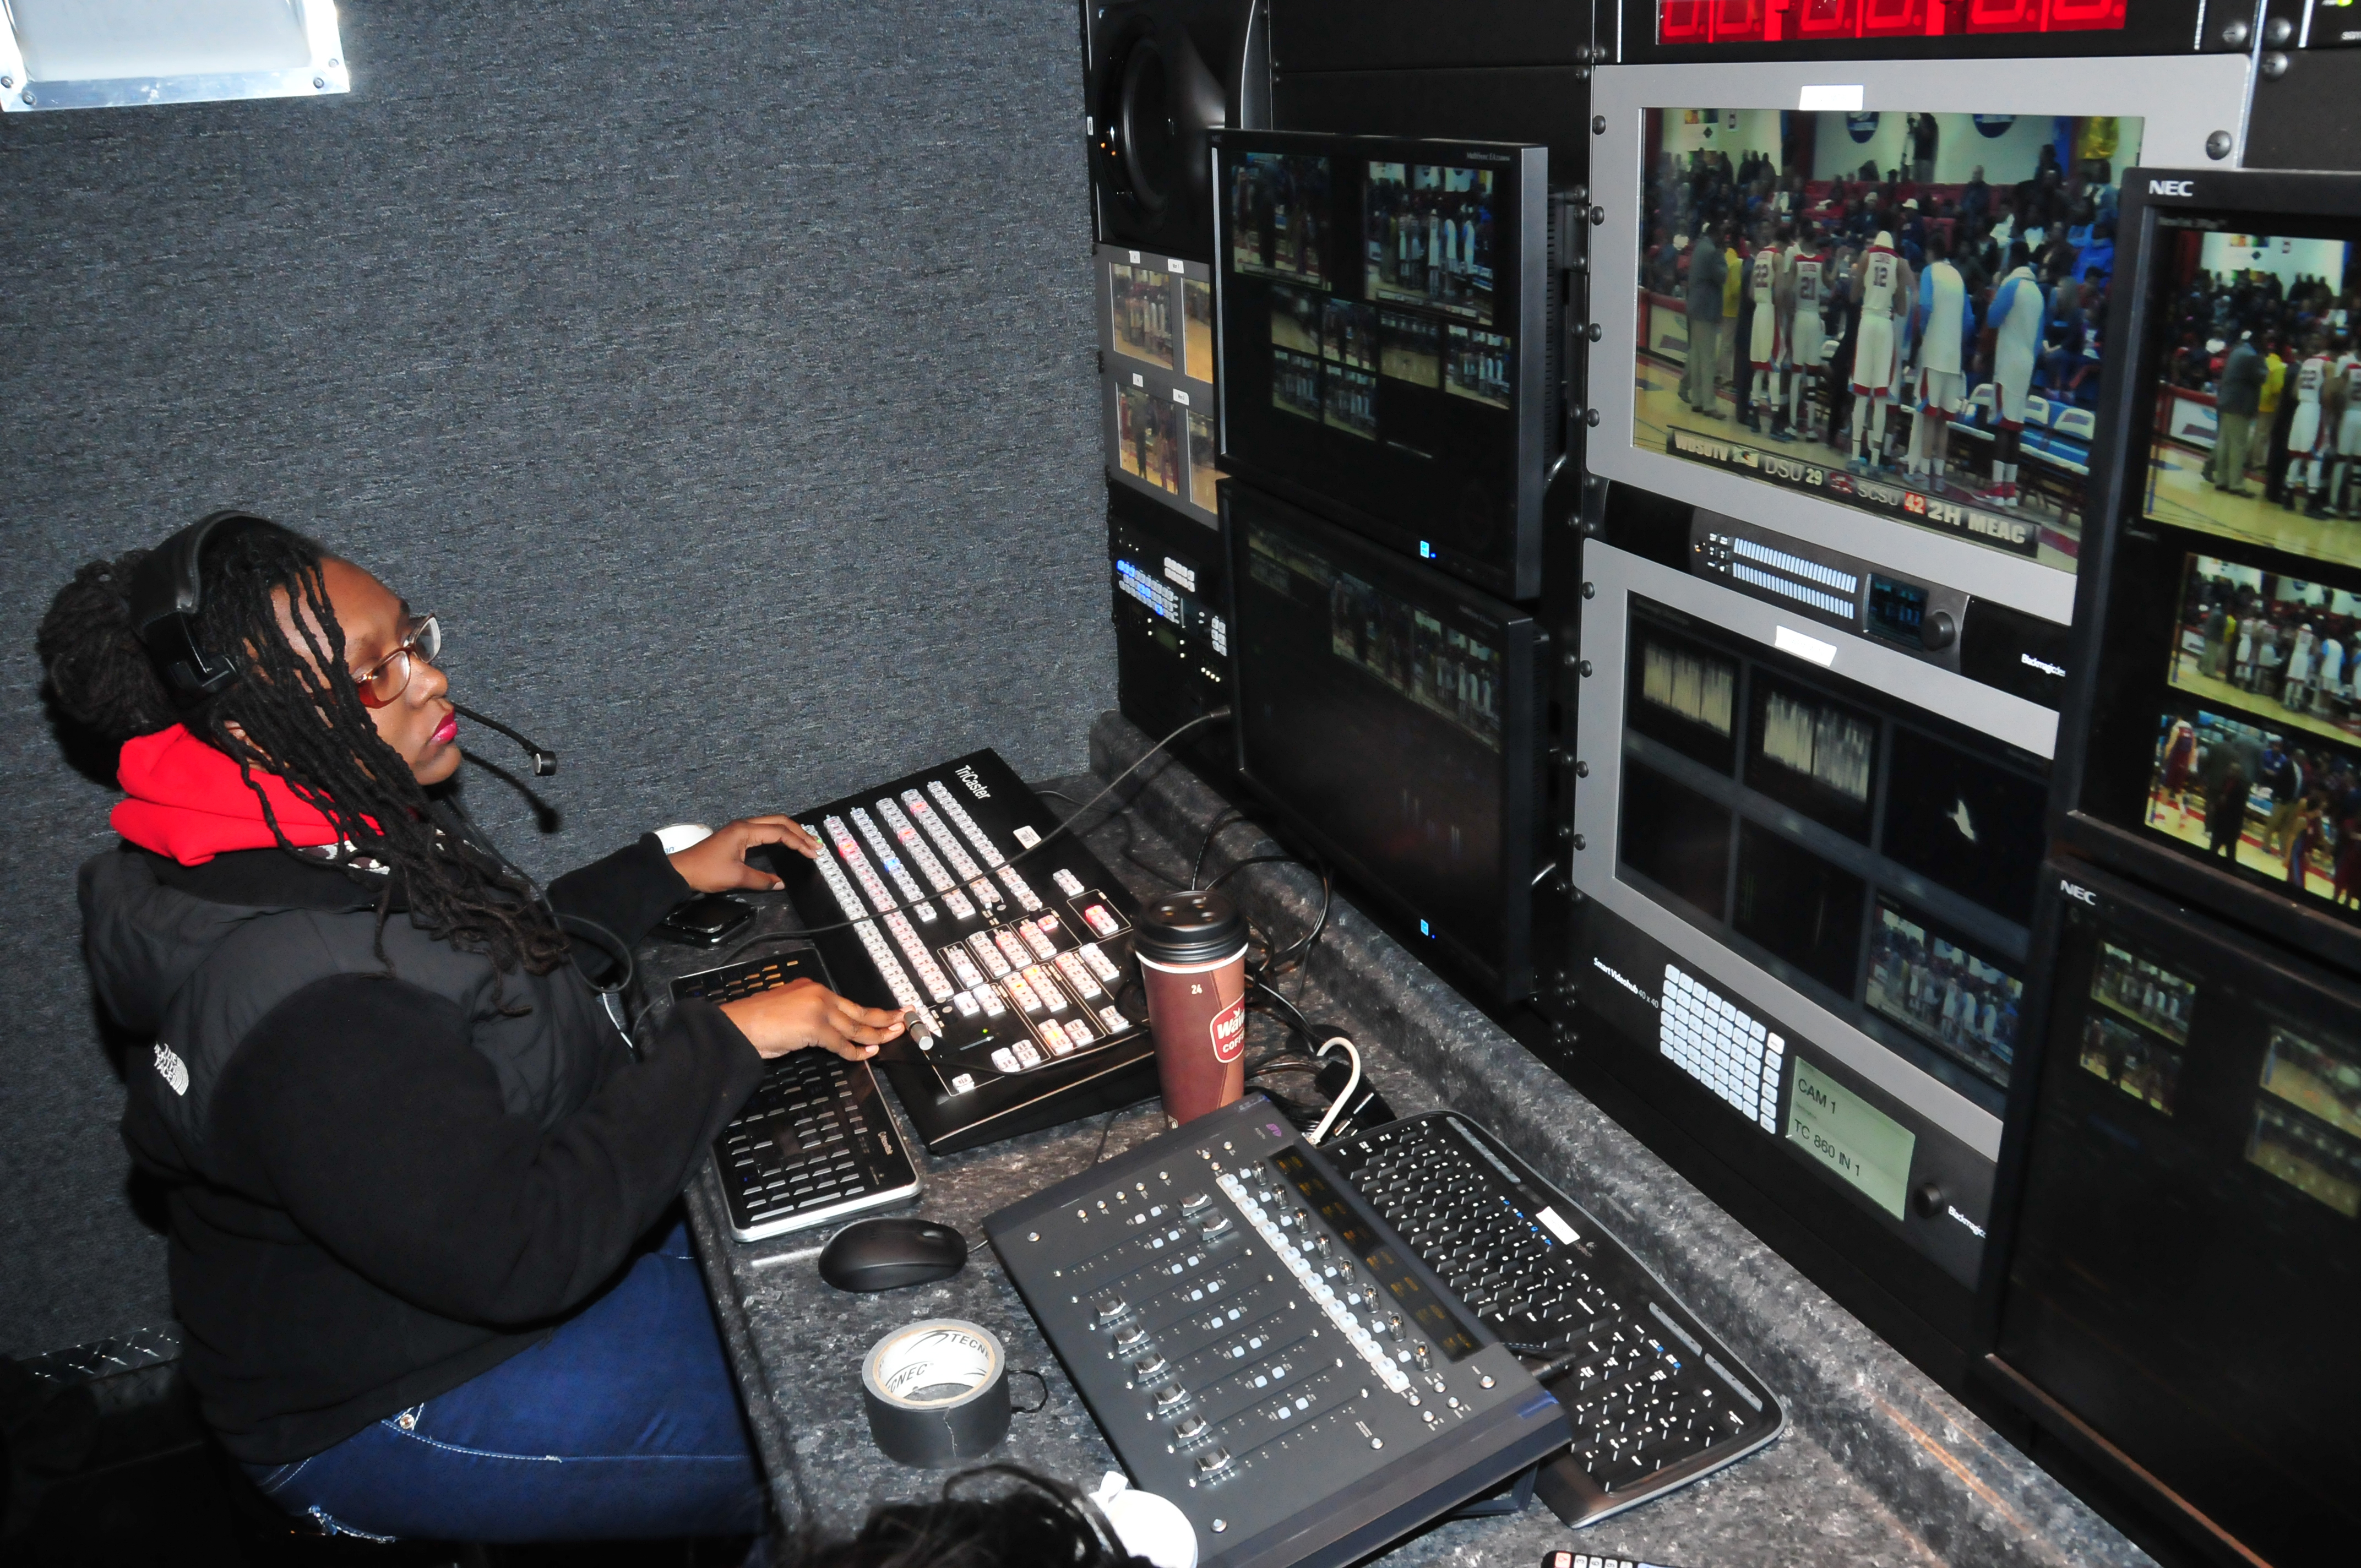 Jasmine Alford works a Hornet basketball game in the Mobile Video Production Trailer. The production trailer has reduced the set-up time for the students and provided them with an excellent hand-on experience environment.